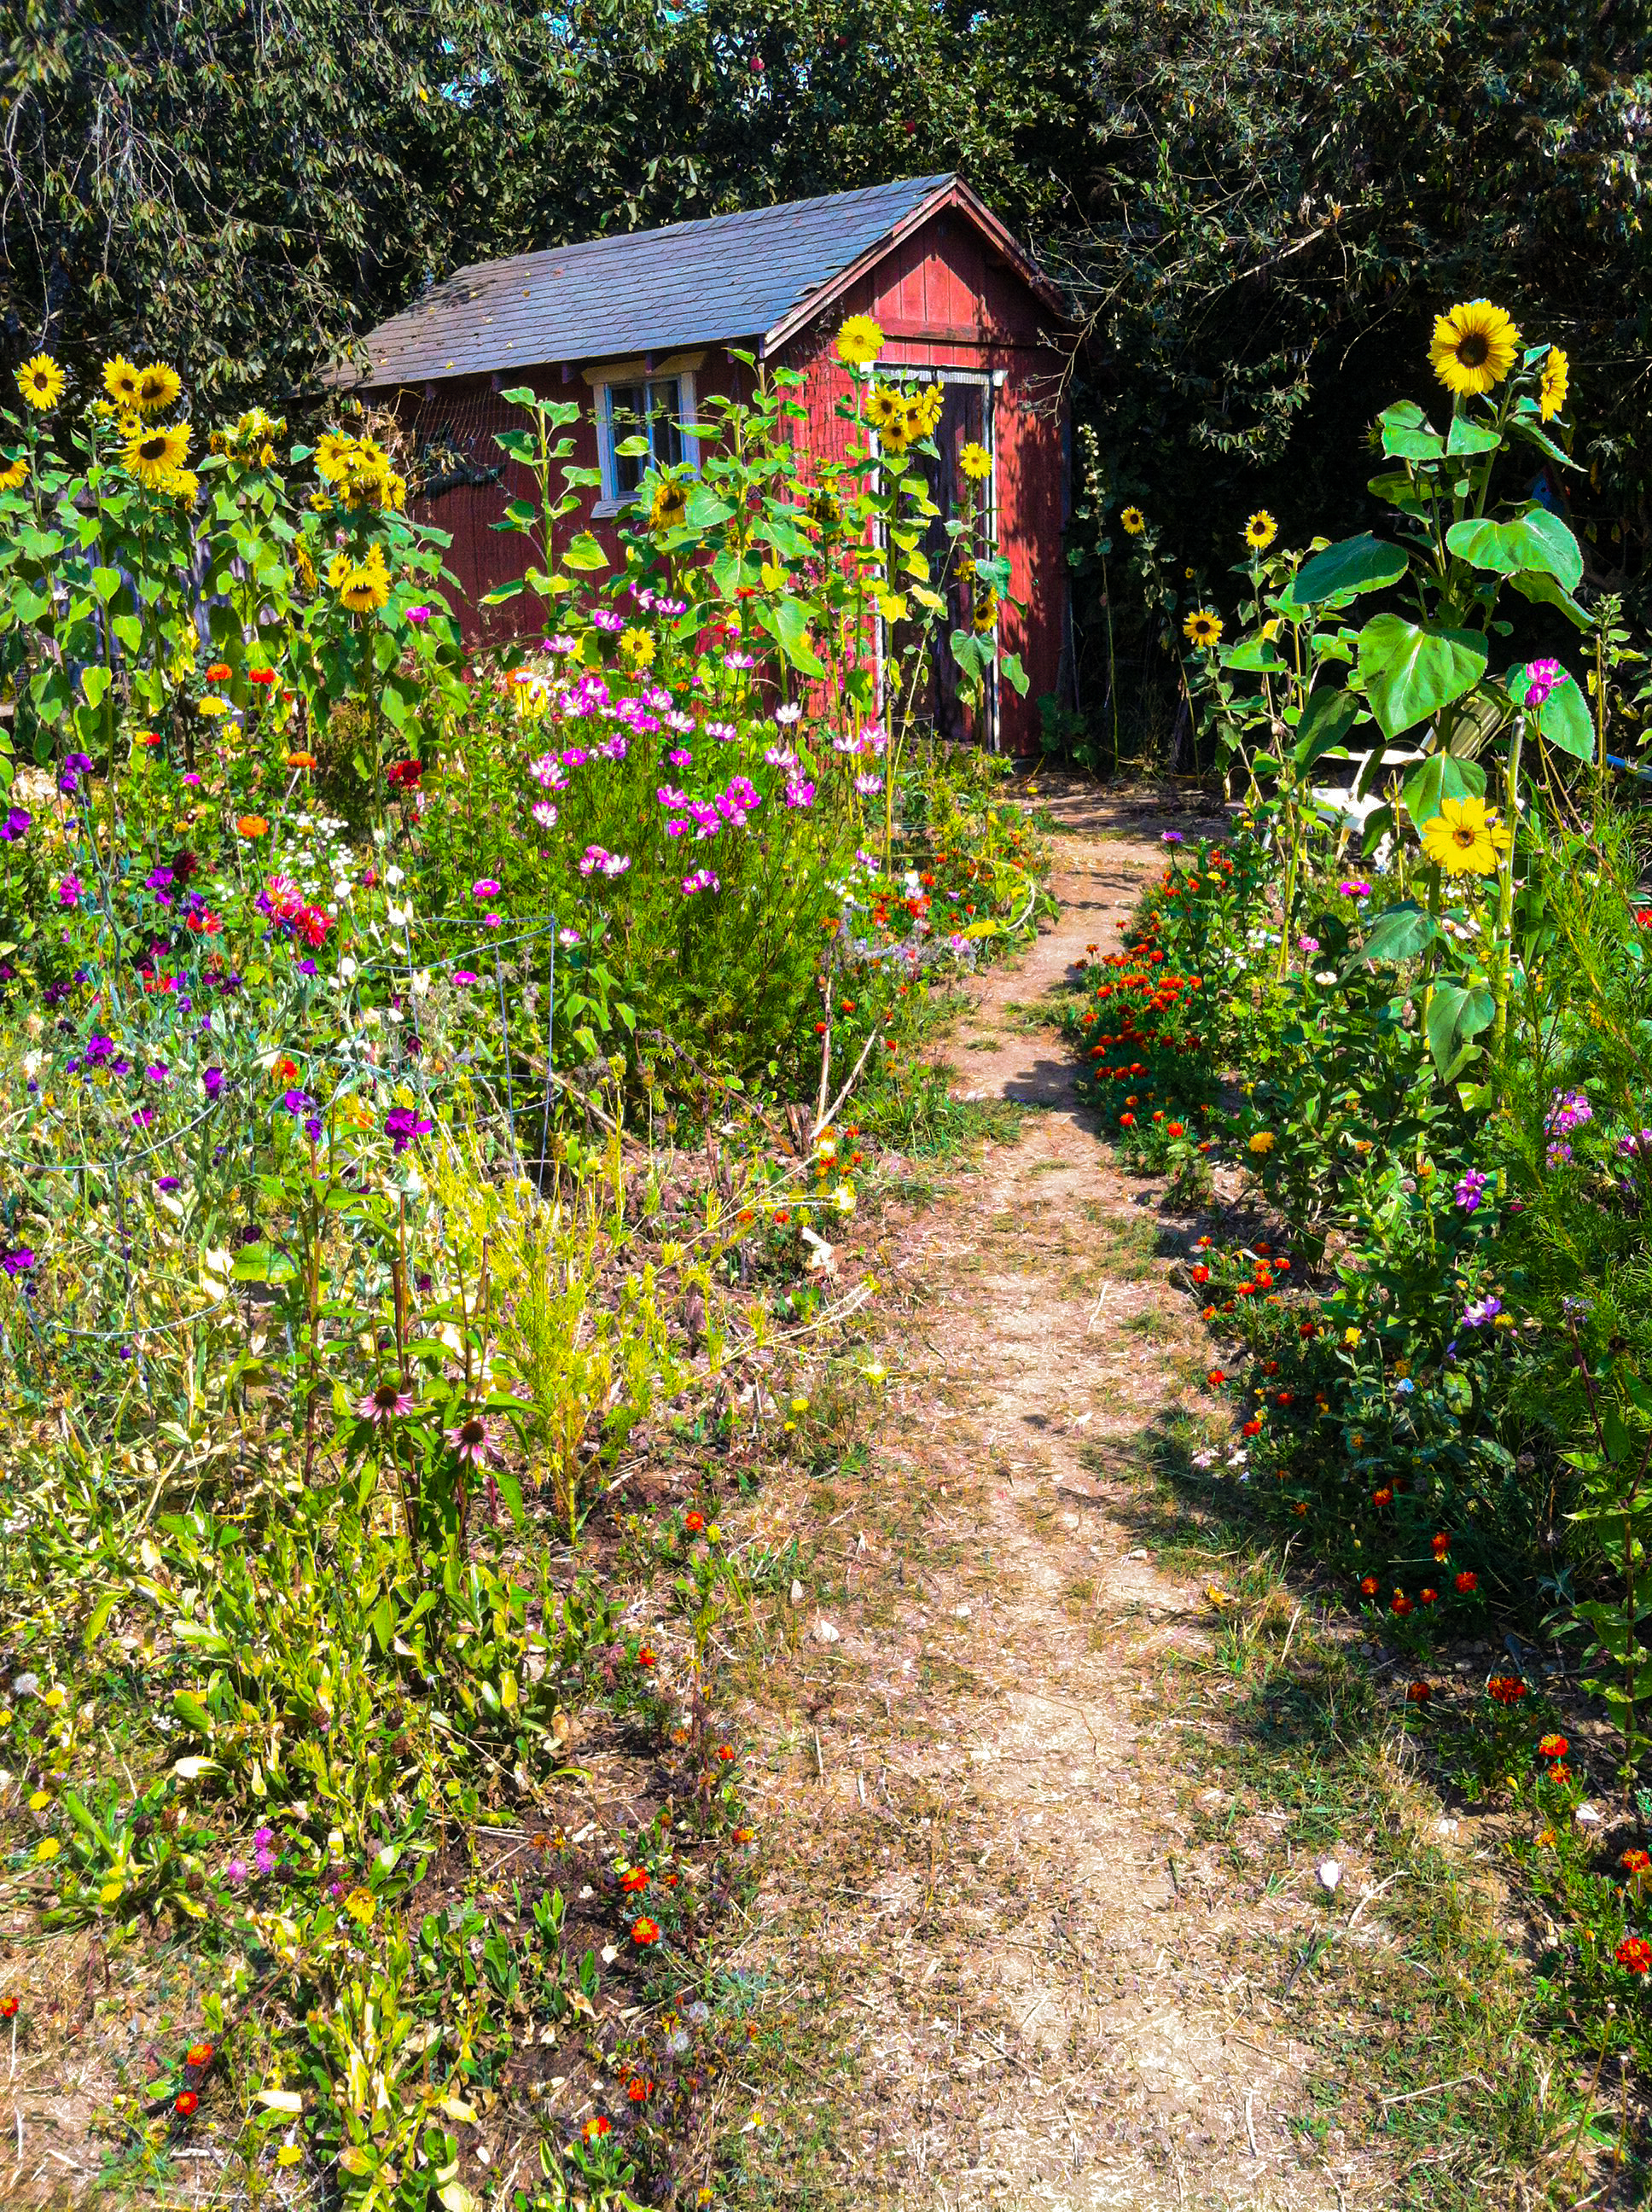 A path lined with shoulder-high, colorful flowers leading to a red shed.